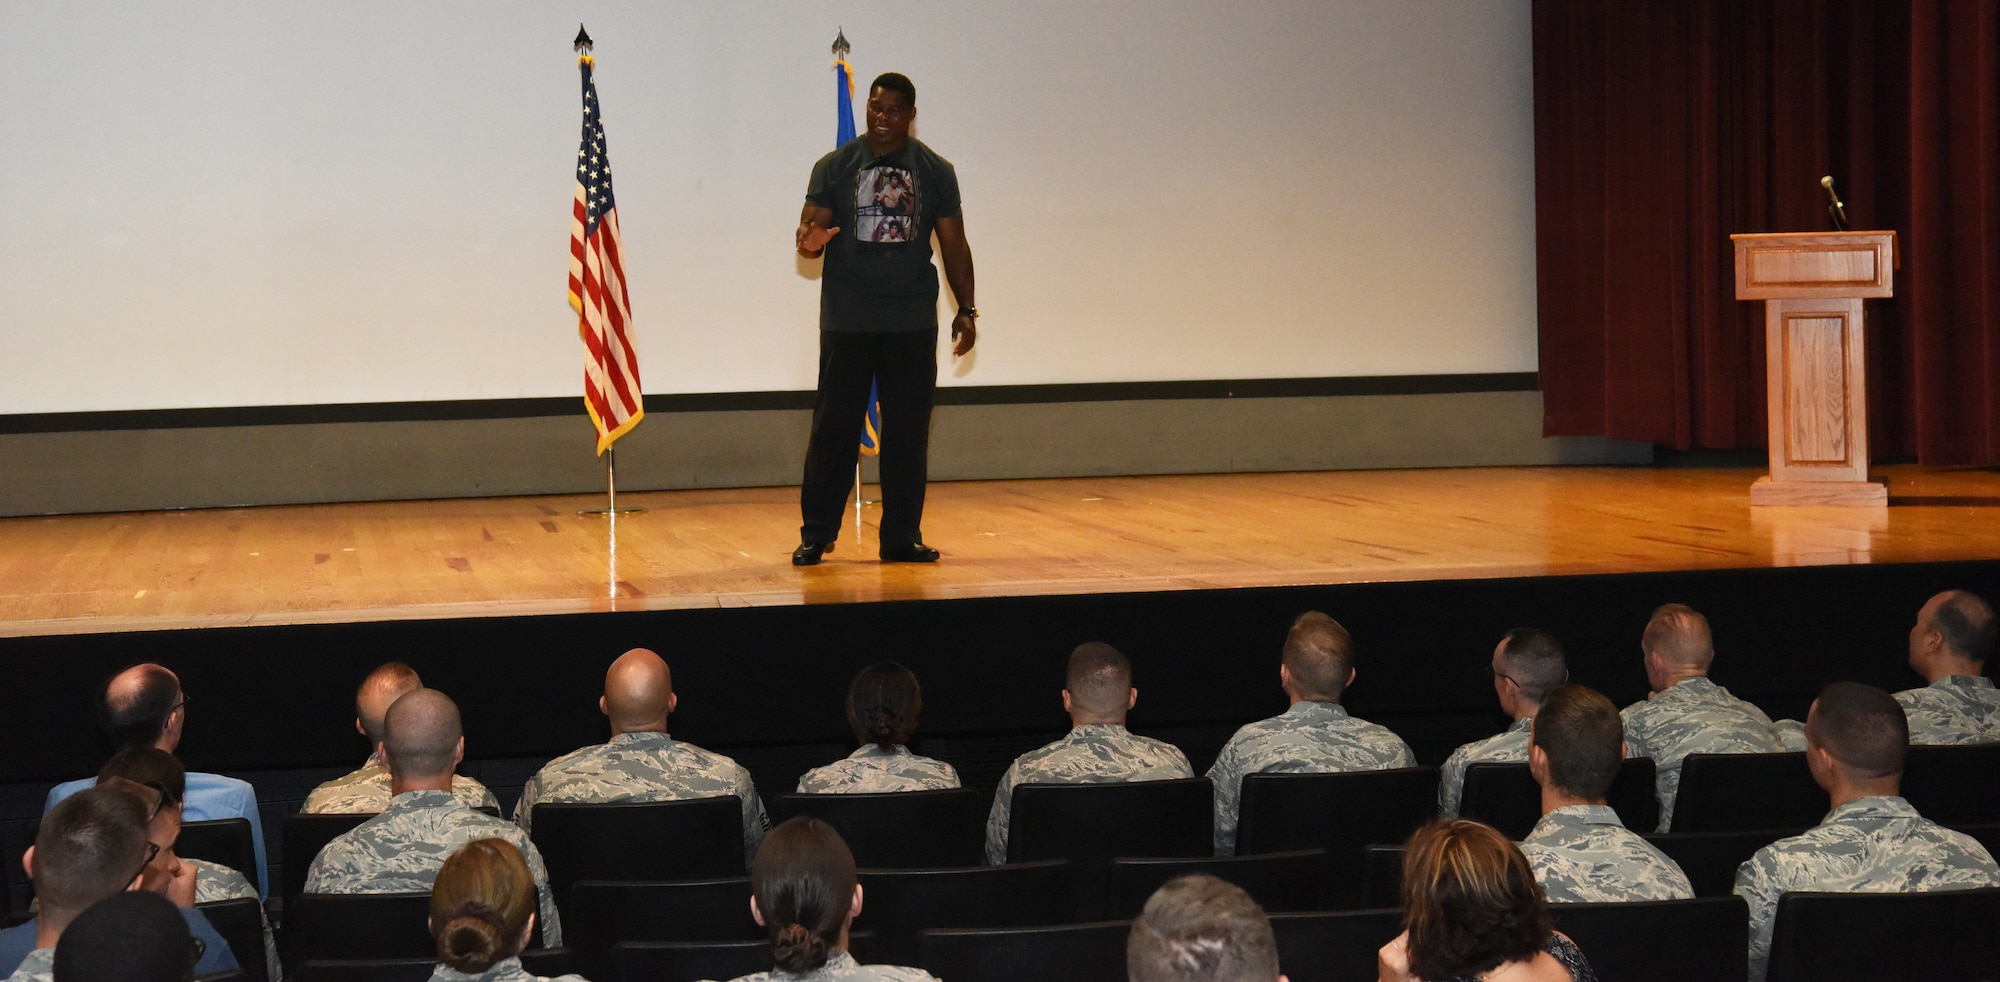 Herschel Walker shares his story about being diagnosed with Dissociative Identity Disorder and seeking help July 18, 2018, at Fairchild Air Force Base, Washington. Walker is a former National Football League player and the 1982 Heisman Trophy winner. (U.S. Air Force photo/Staff Sgt. Samantha Krolikowski)